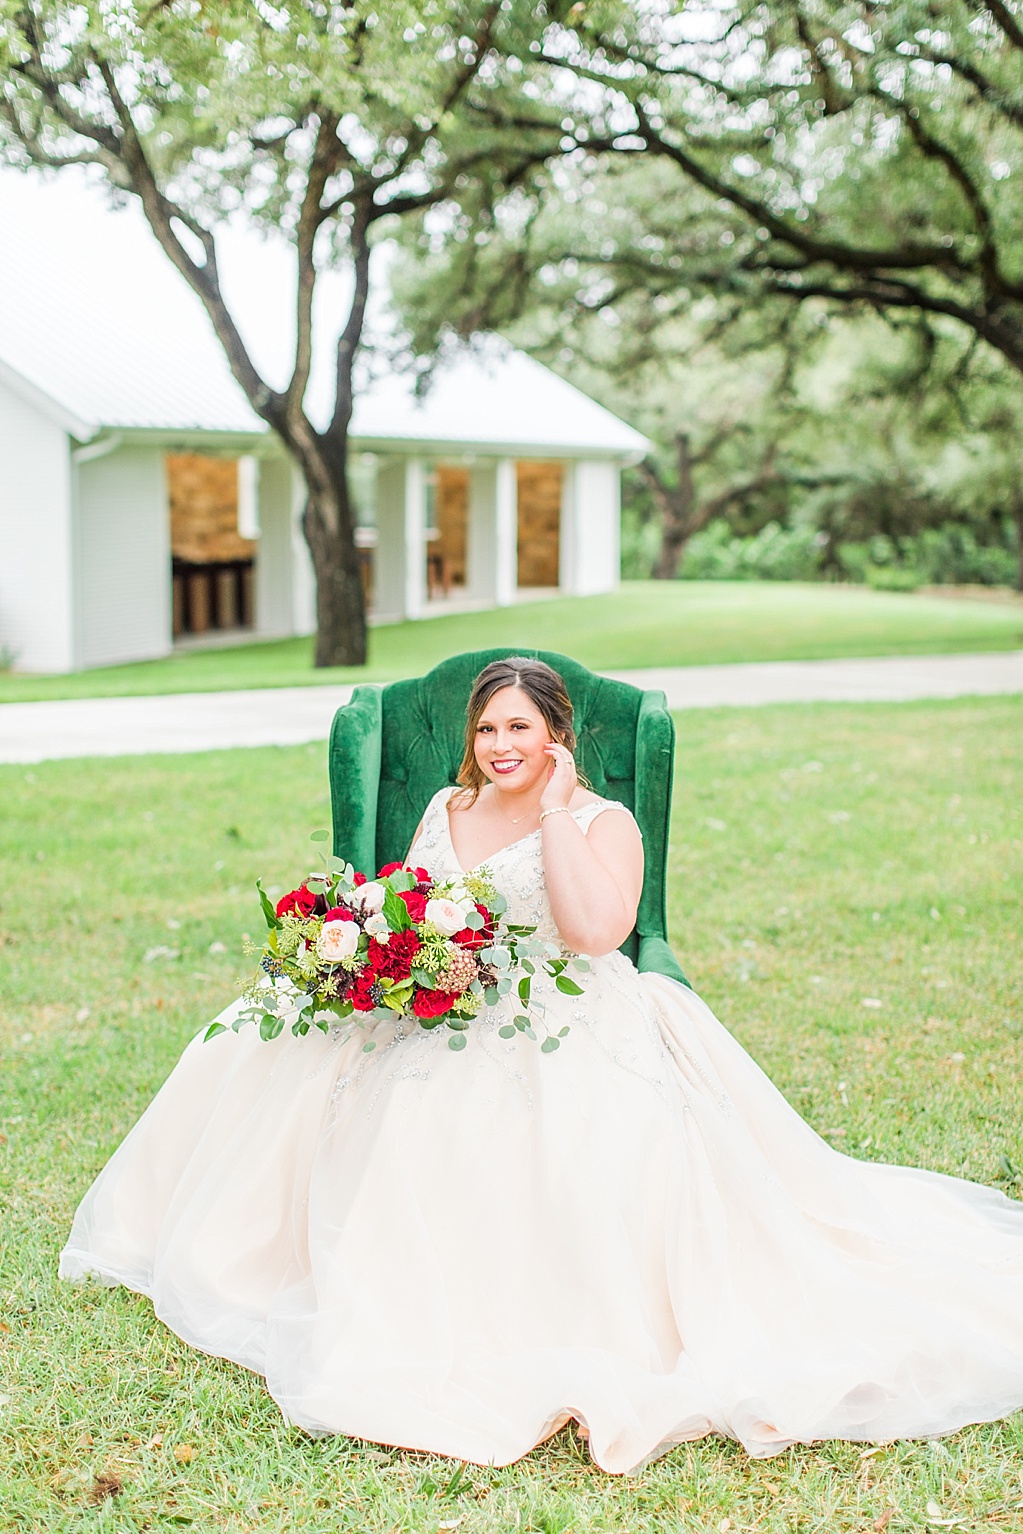 Bridal photos at The Chandelier of Gruene New Braunfels in the rain 0011